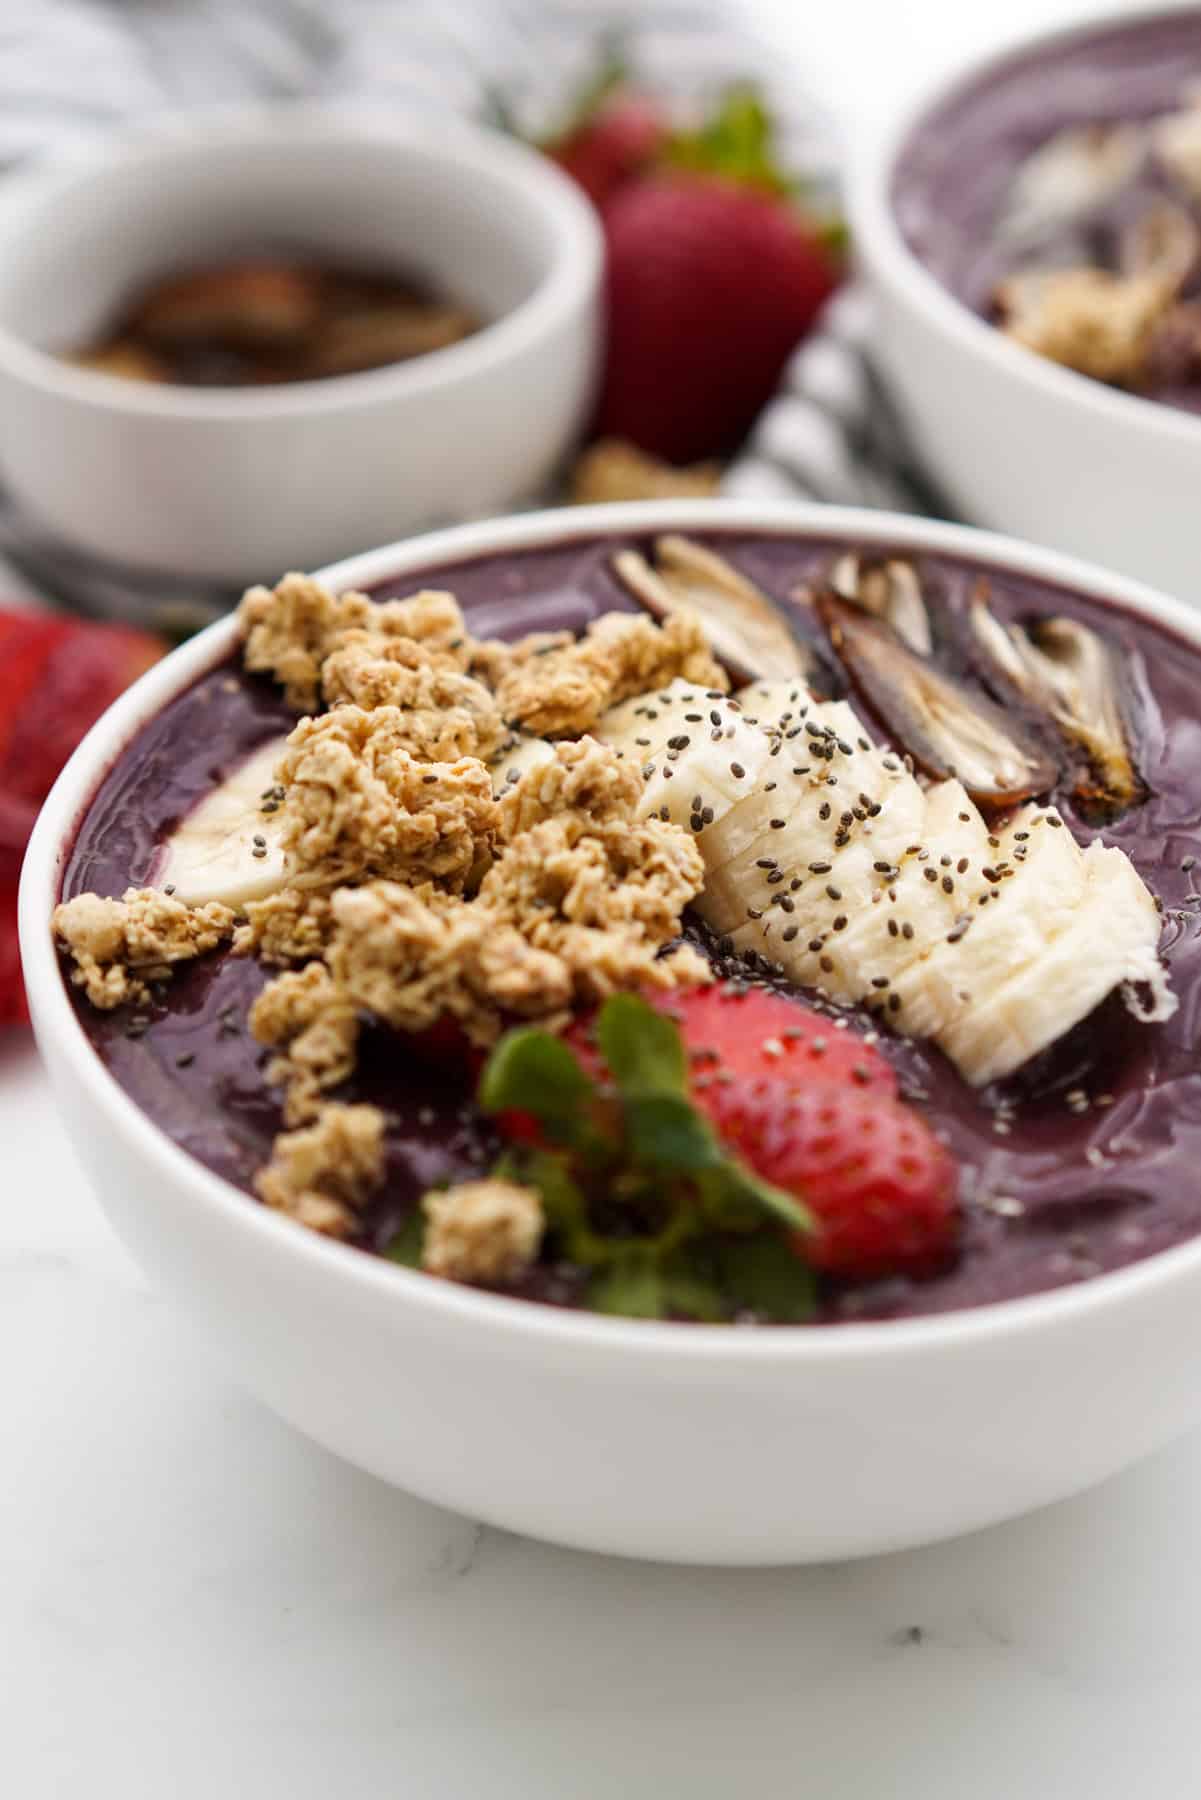 A bowl of acai smoothie bowl with bananas, strawberries, dates and granola